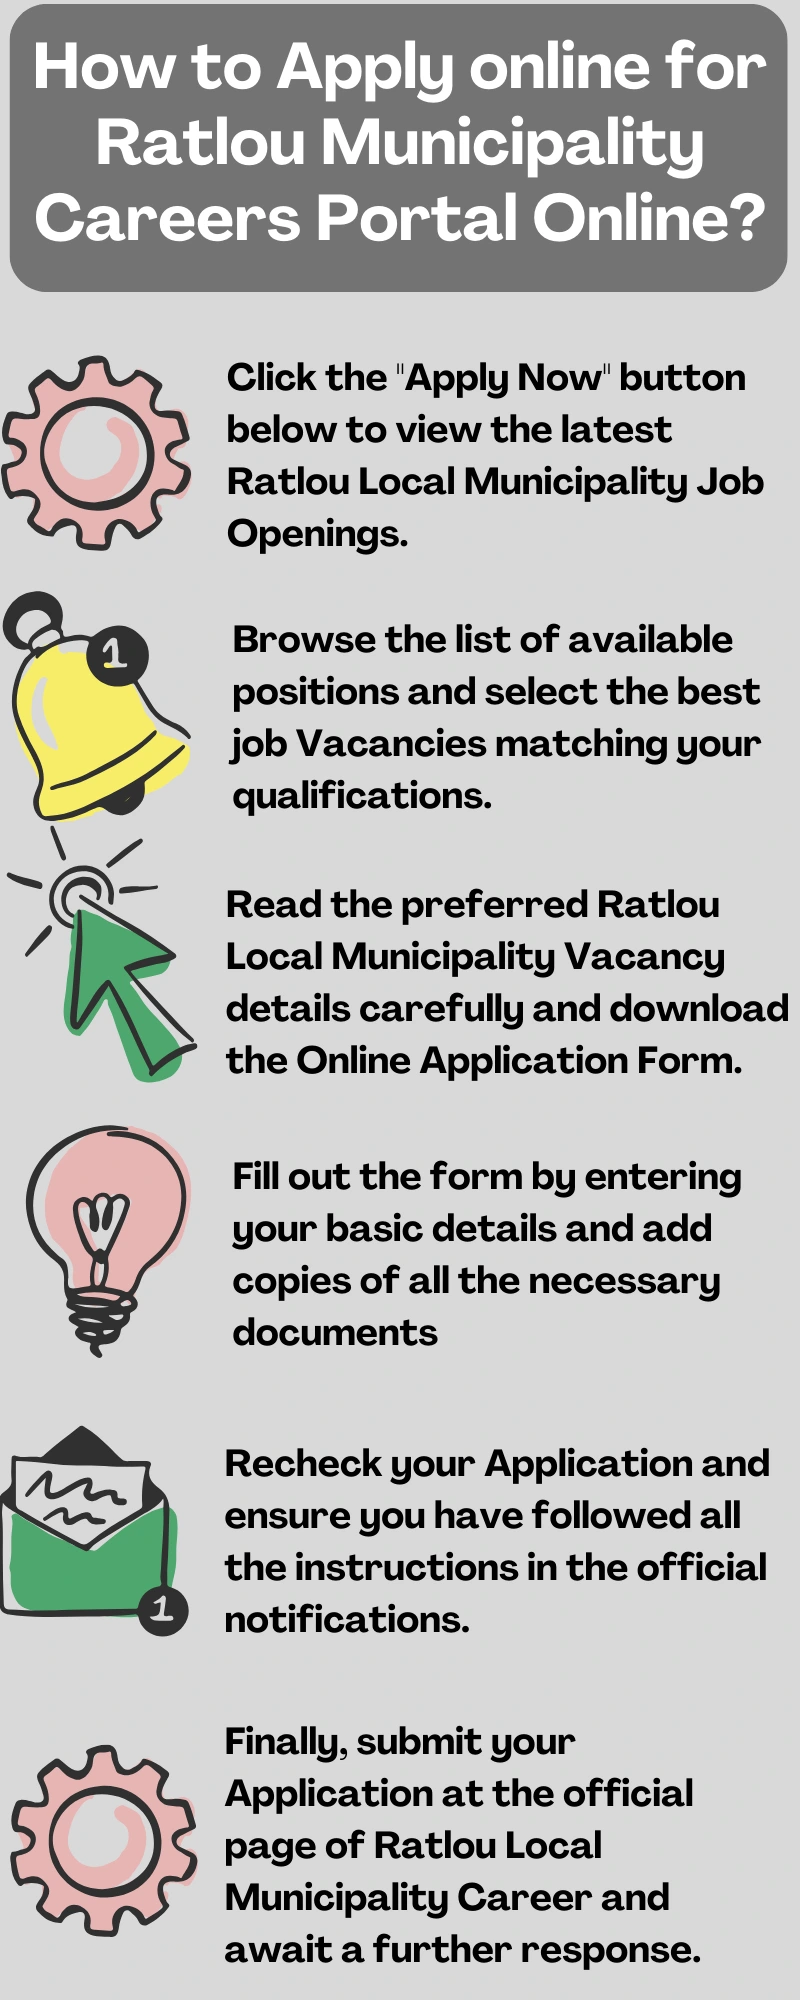 How to Apply online for Ratlou Municipality Careers Portal Online?